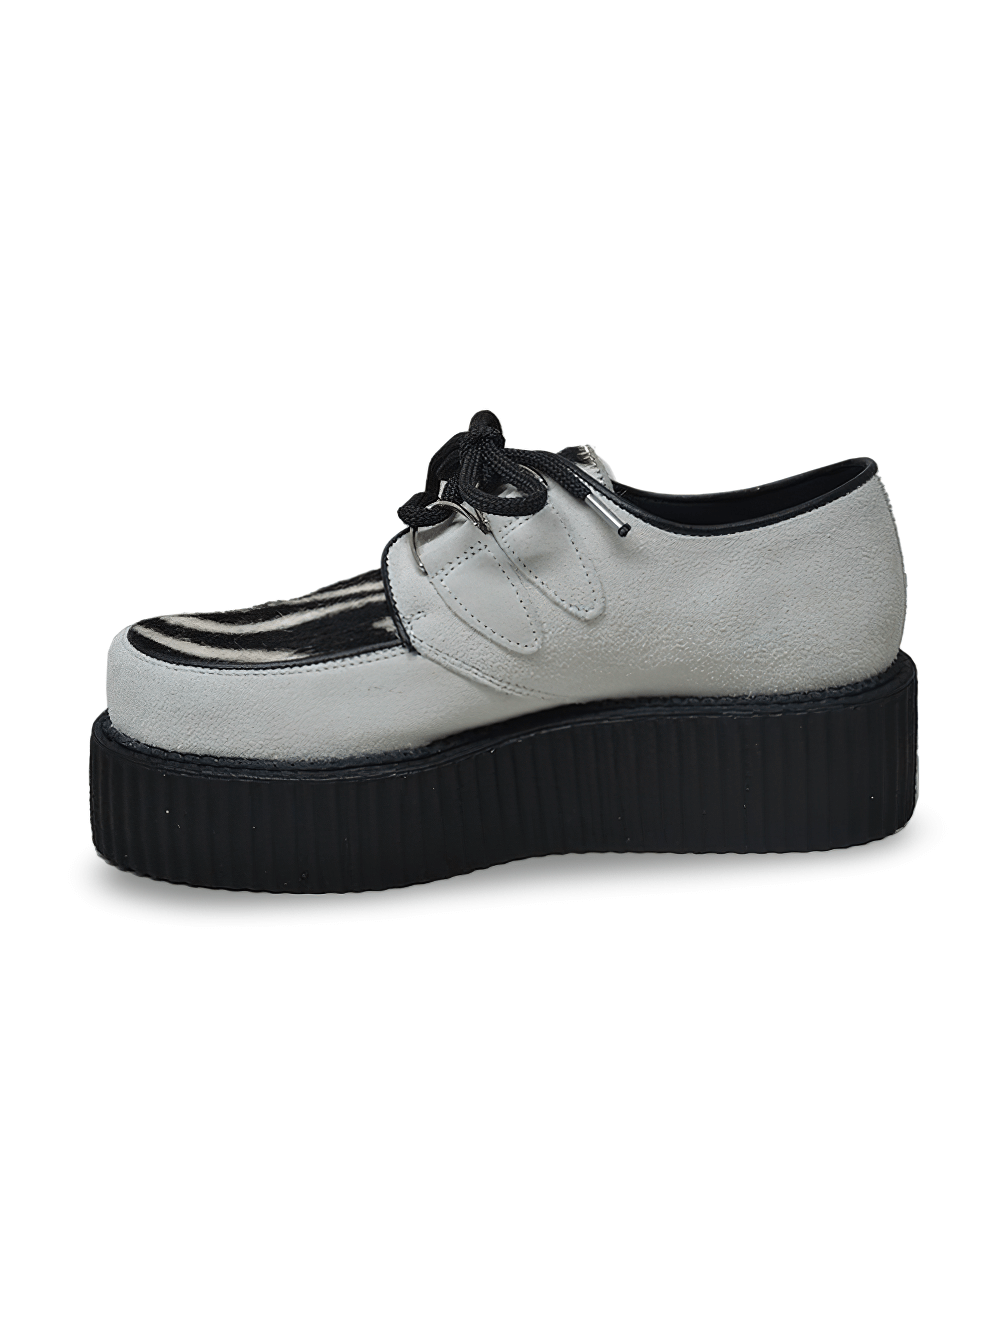 Dual-Tone Suede Creeper Shoes with Double Sole